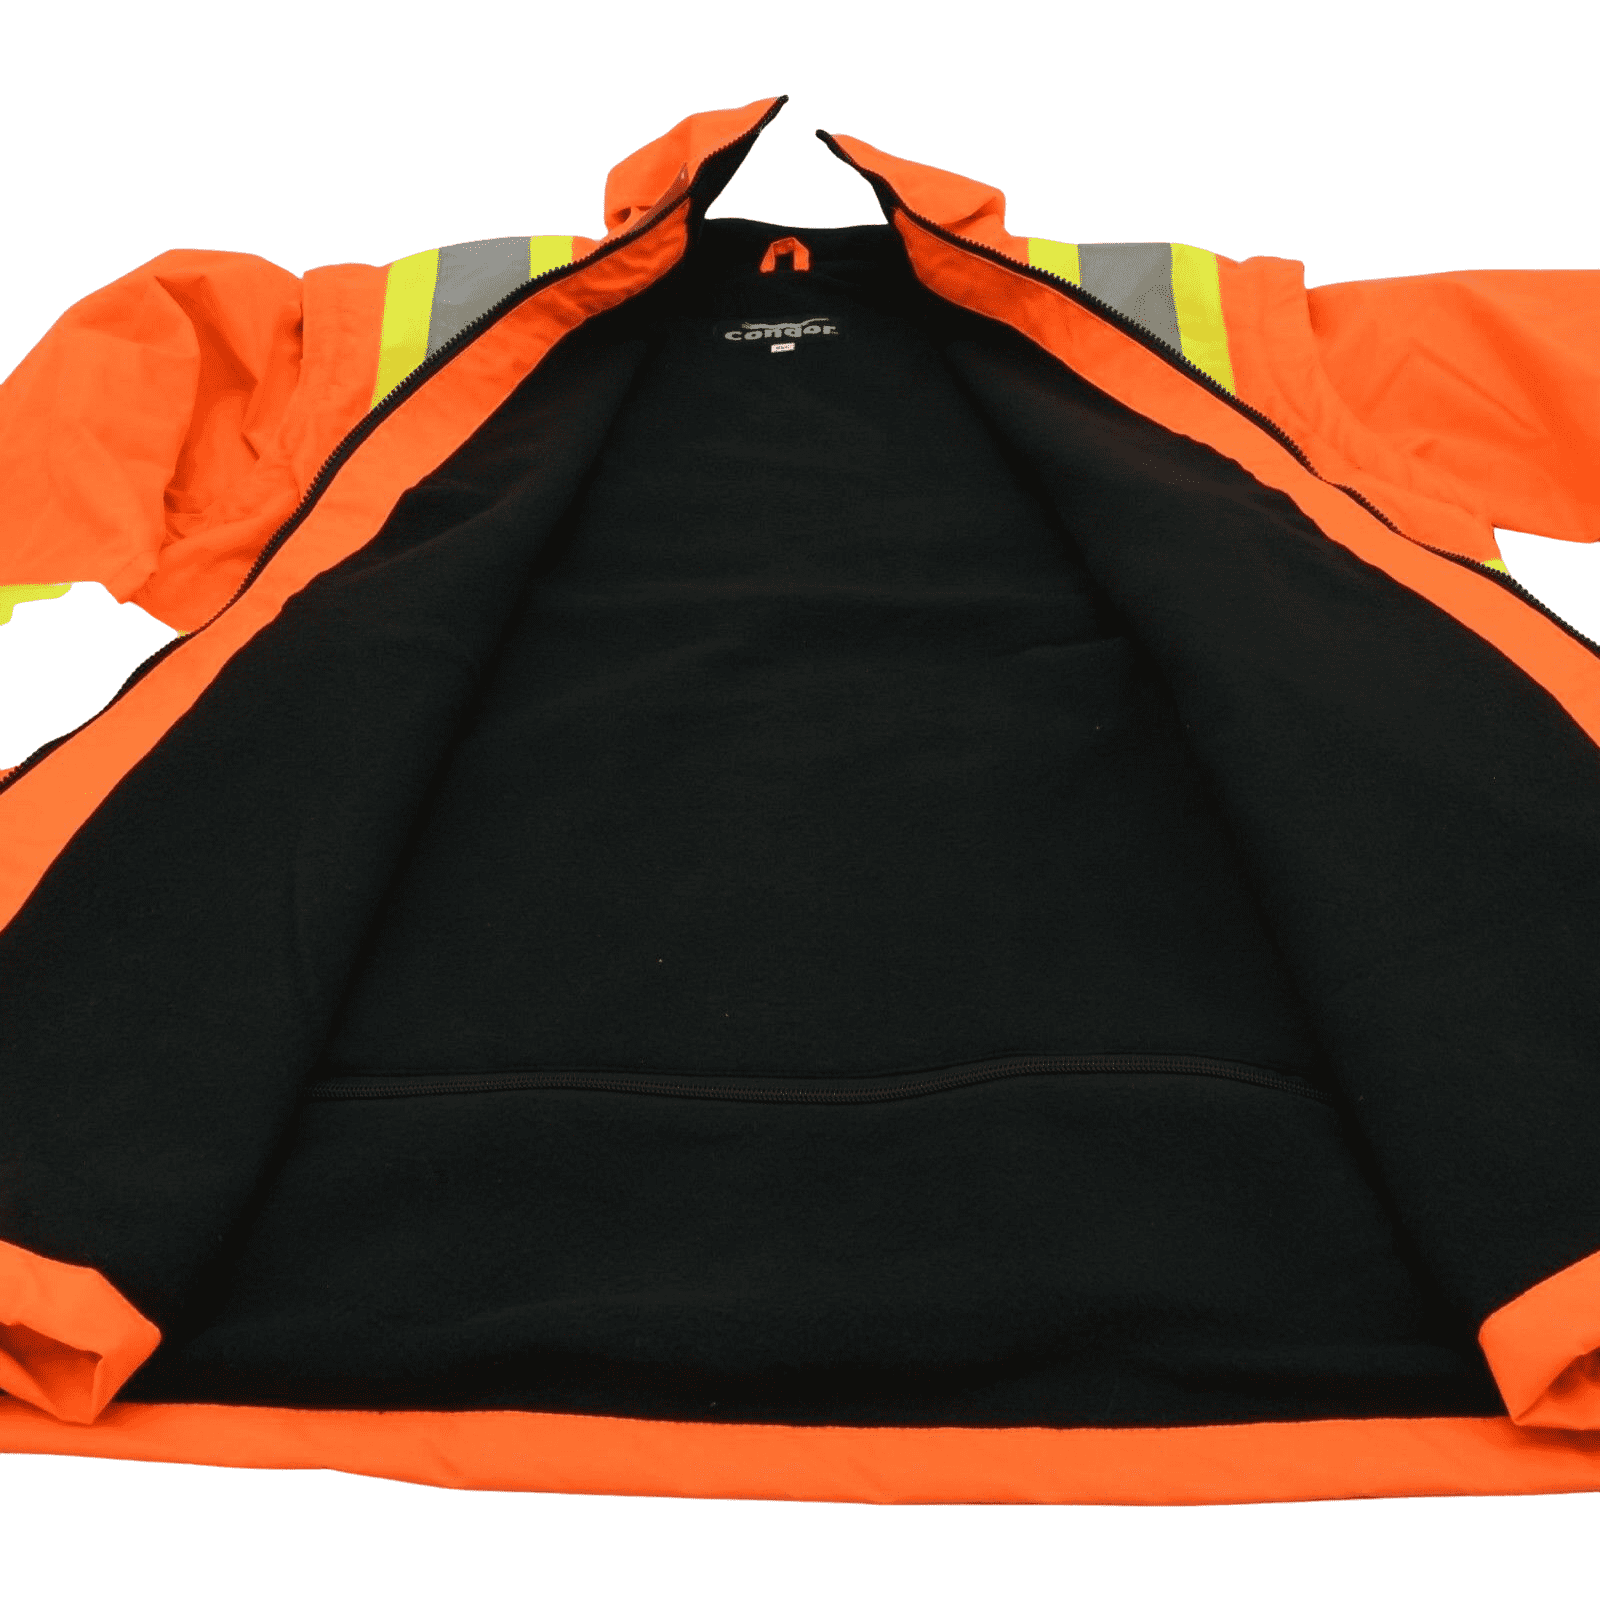 Condor 2-in-1 Traffic work jacket with removable sleeves and black fleece lining size extra Large